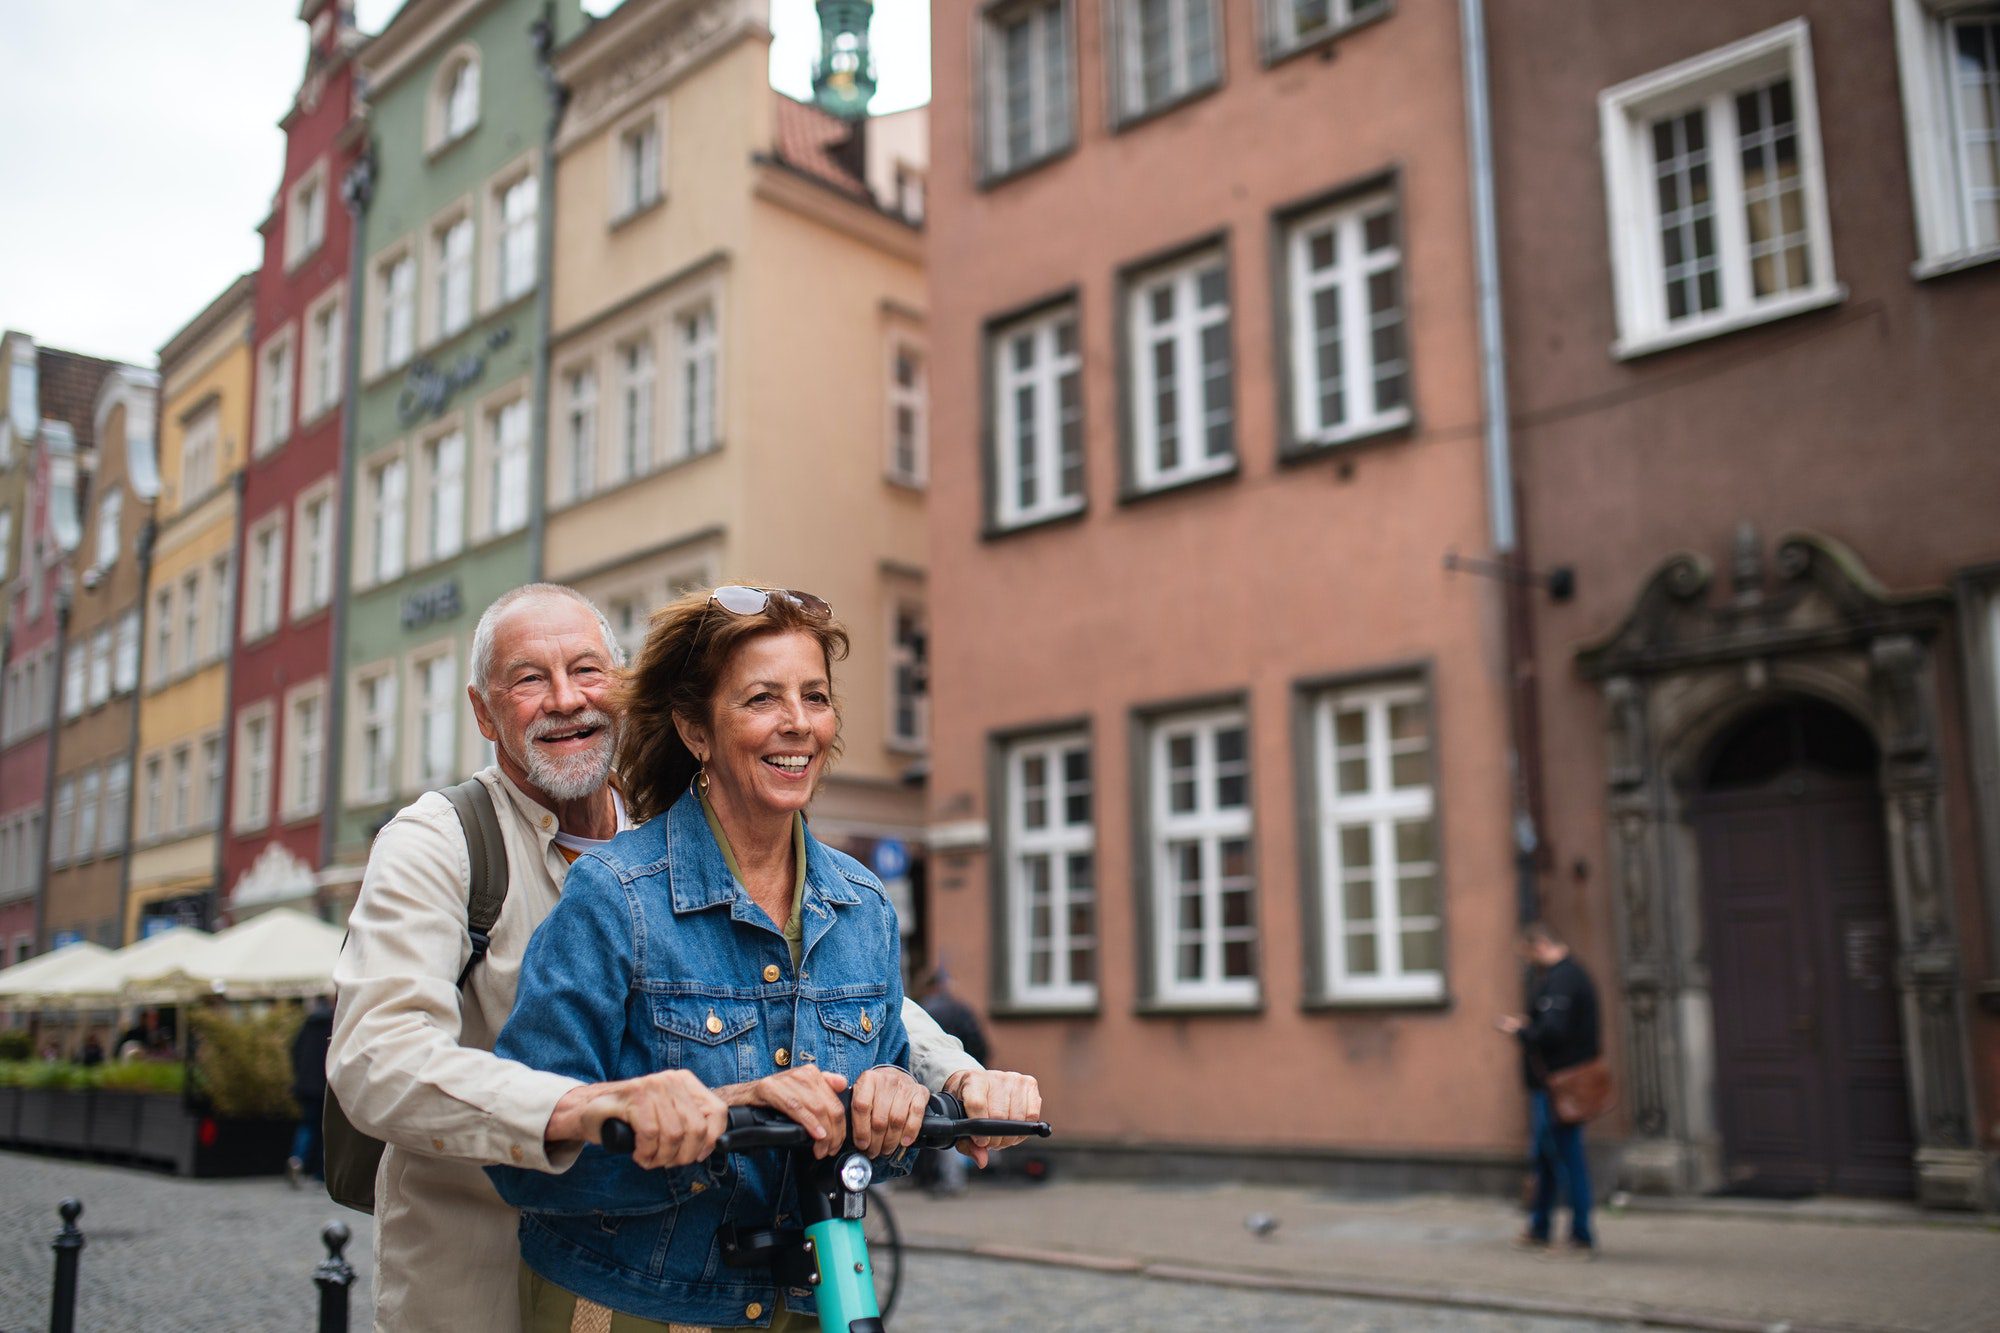 Happy senior couple riding a scooter as they discuss the reasons why Medicare Advantage could be bad.